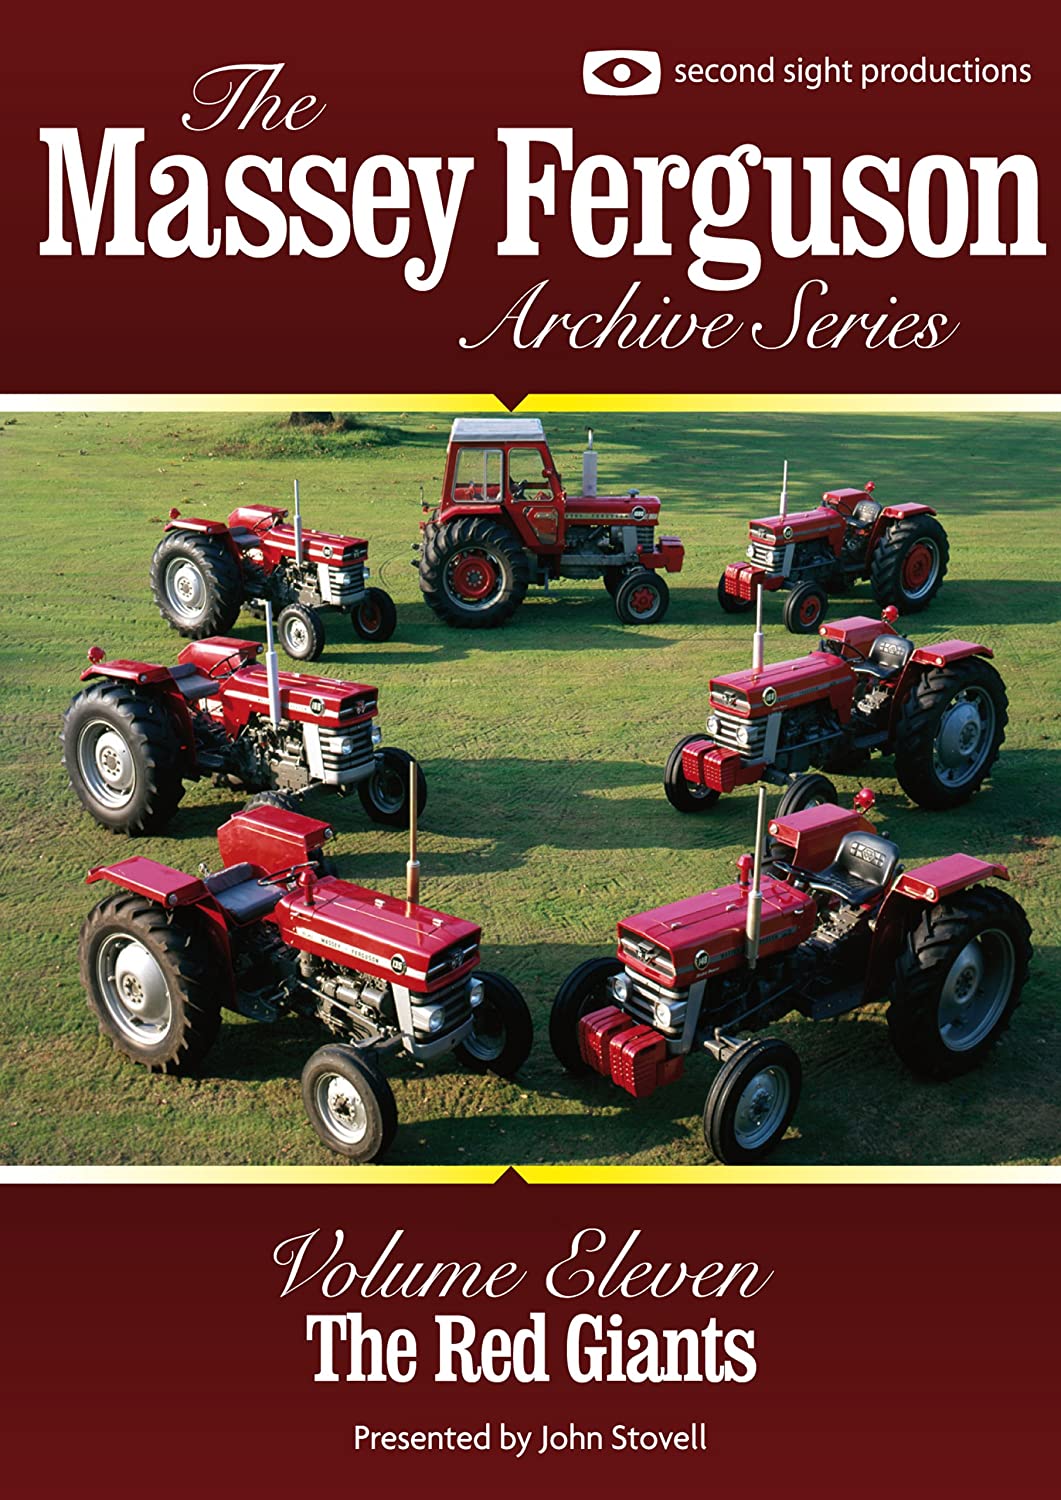 THE MASSEY FERGUSON ARCHIVE SERIES Vol 11 The Red Giants